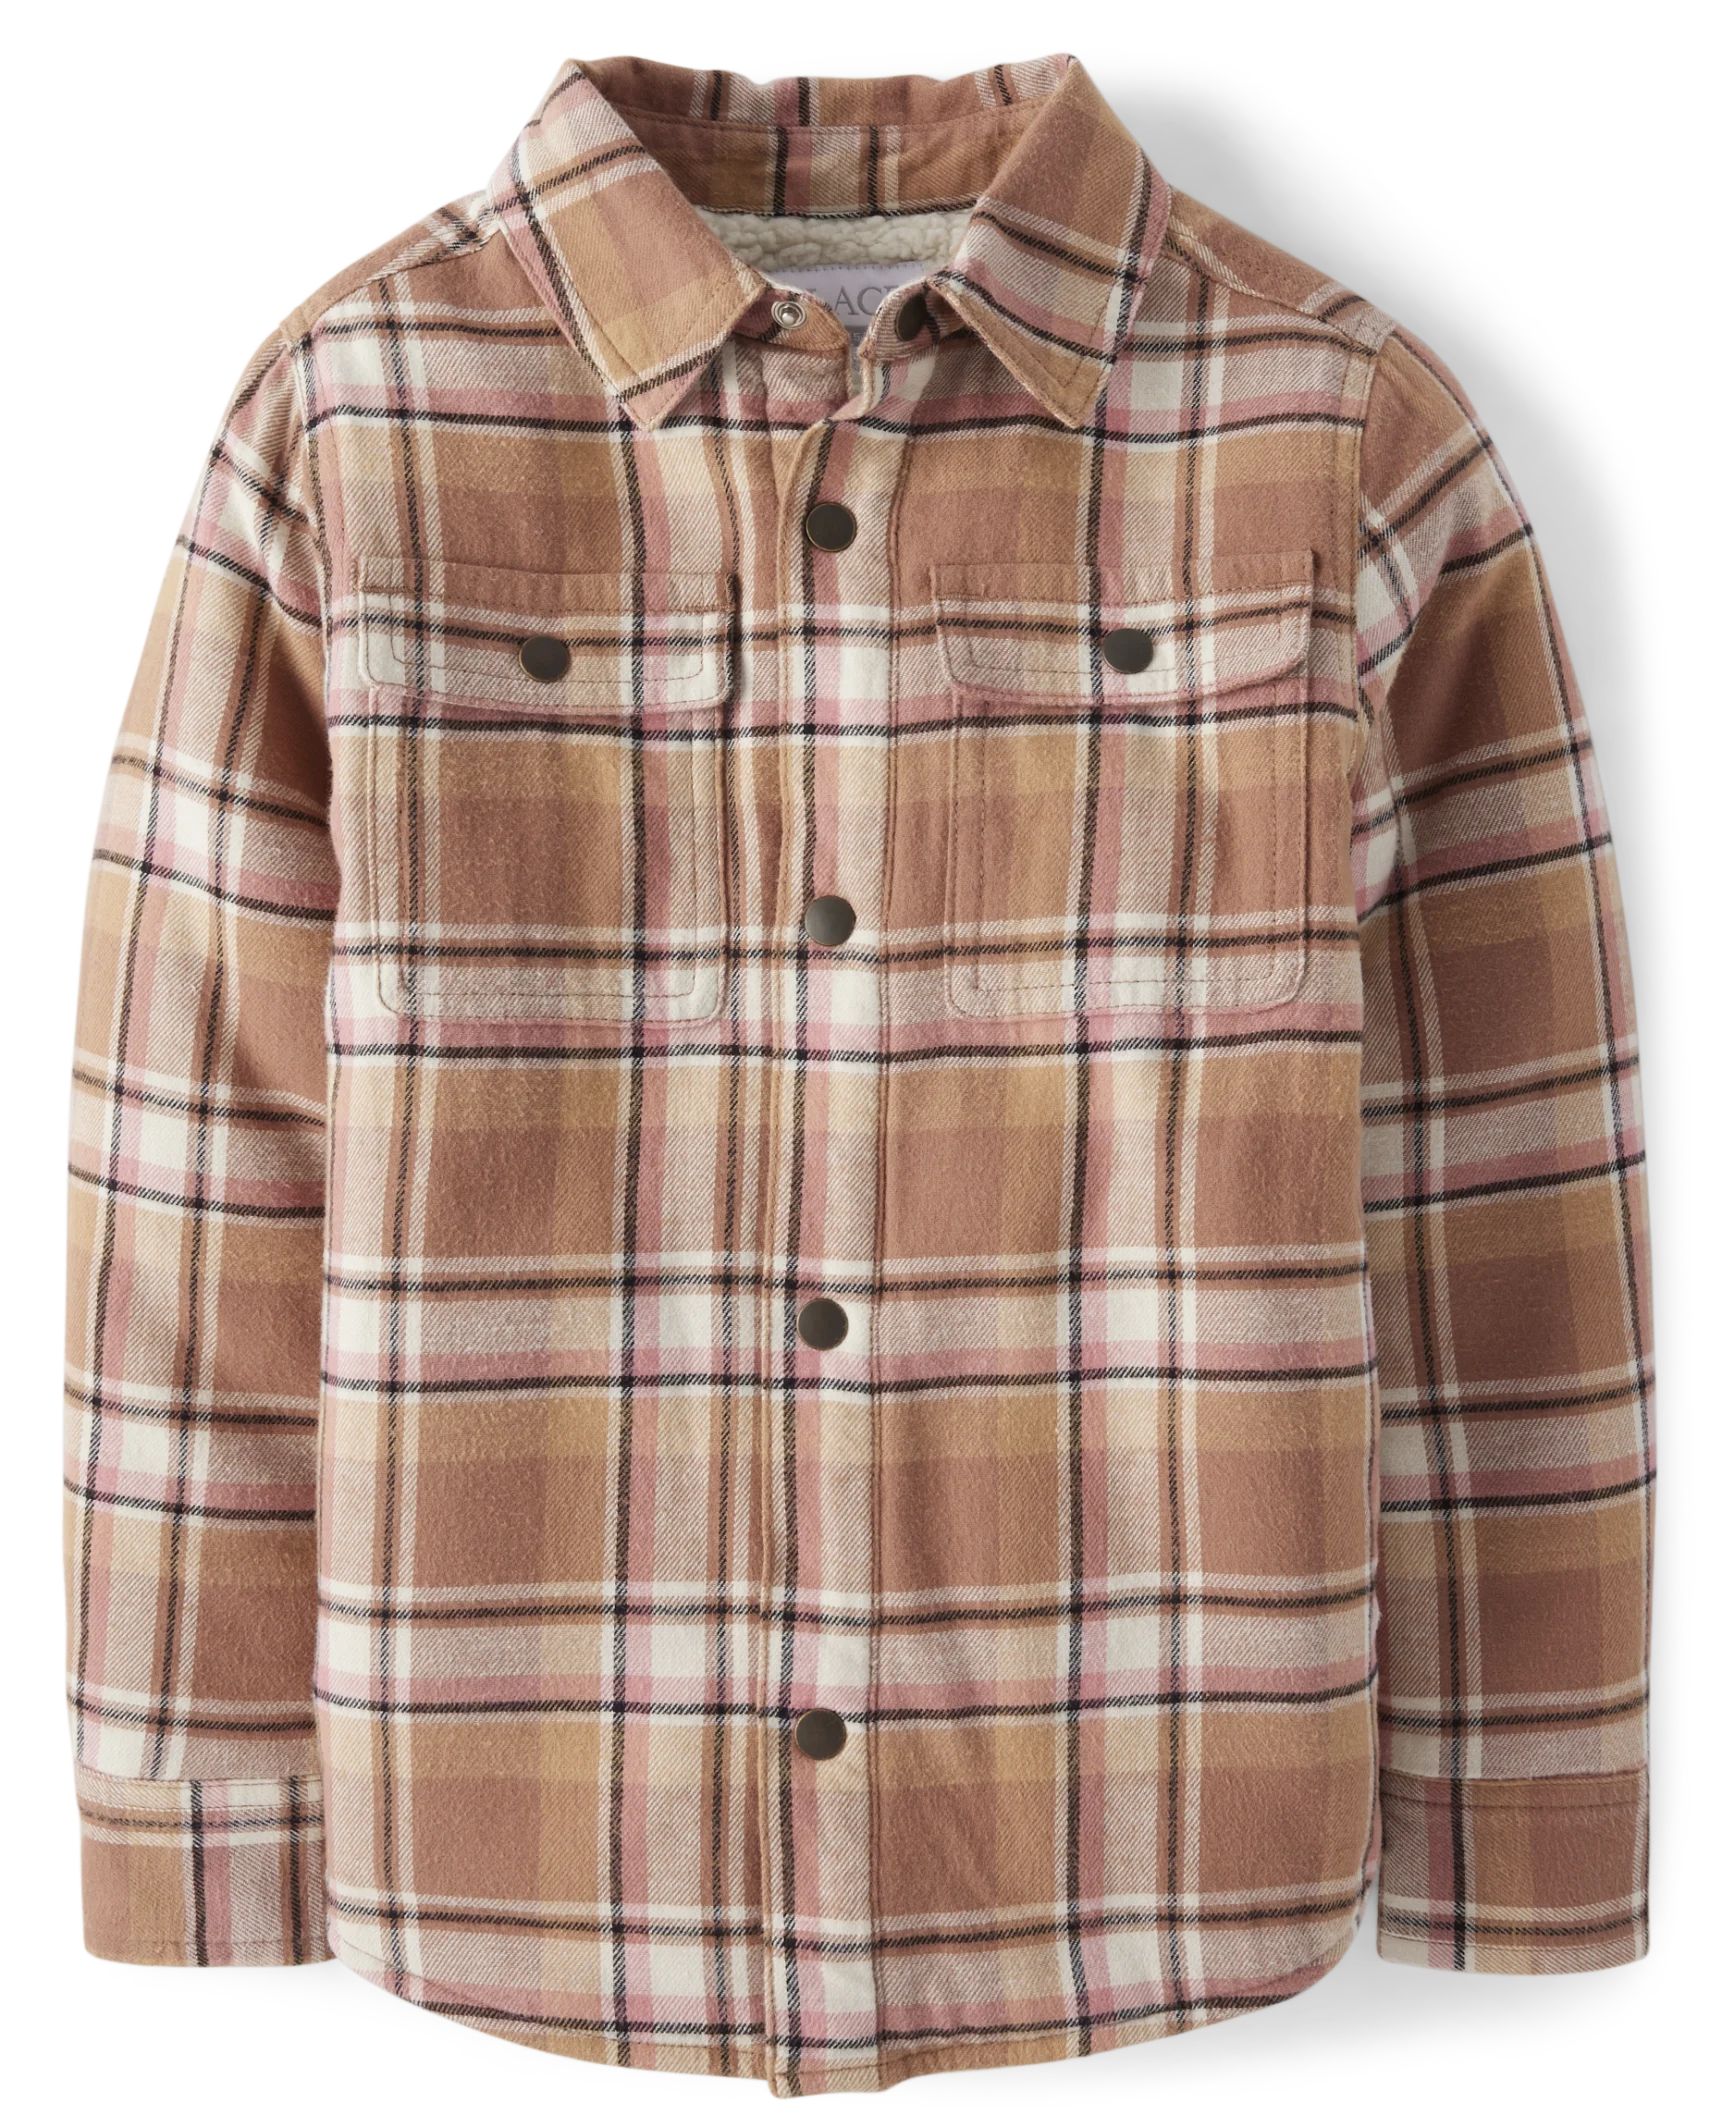 Girls Plaid Sherpa-Lined Shacket - pecan pie | The Children's Place